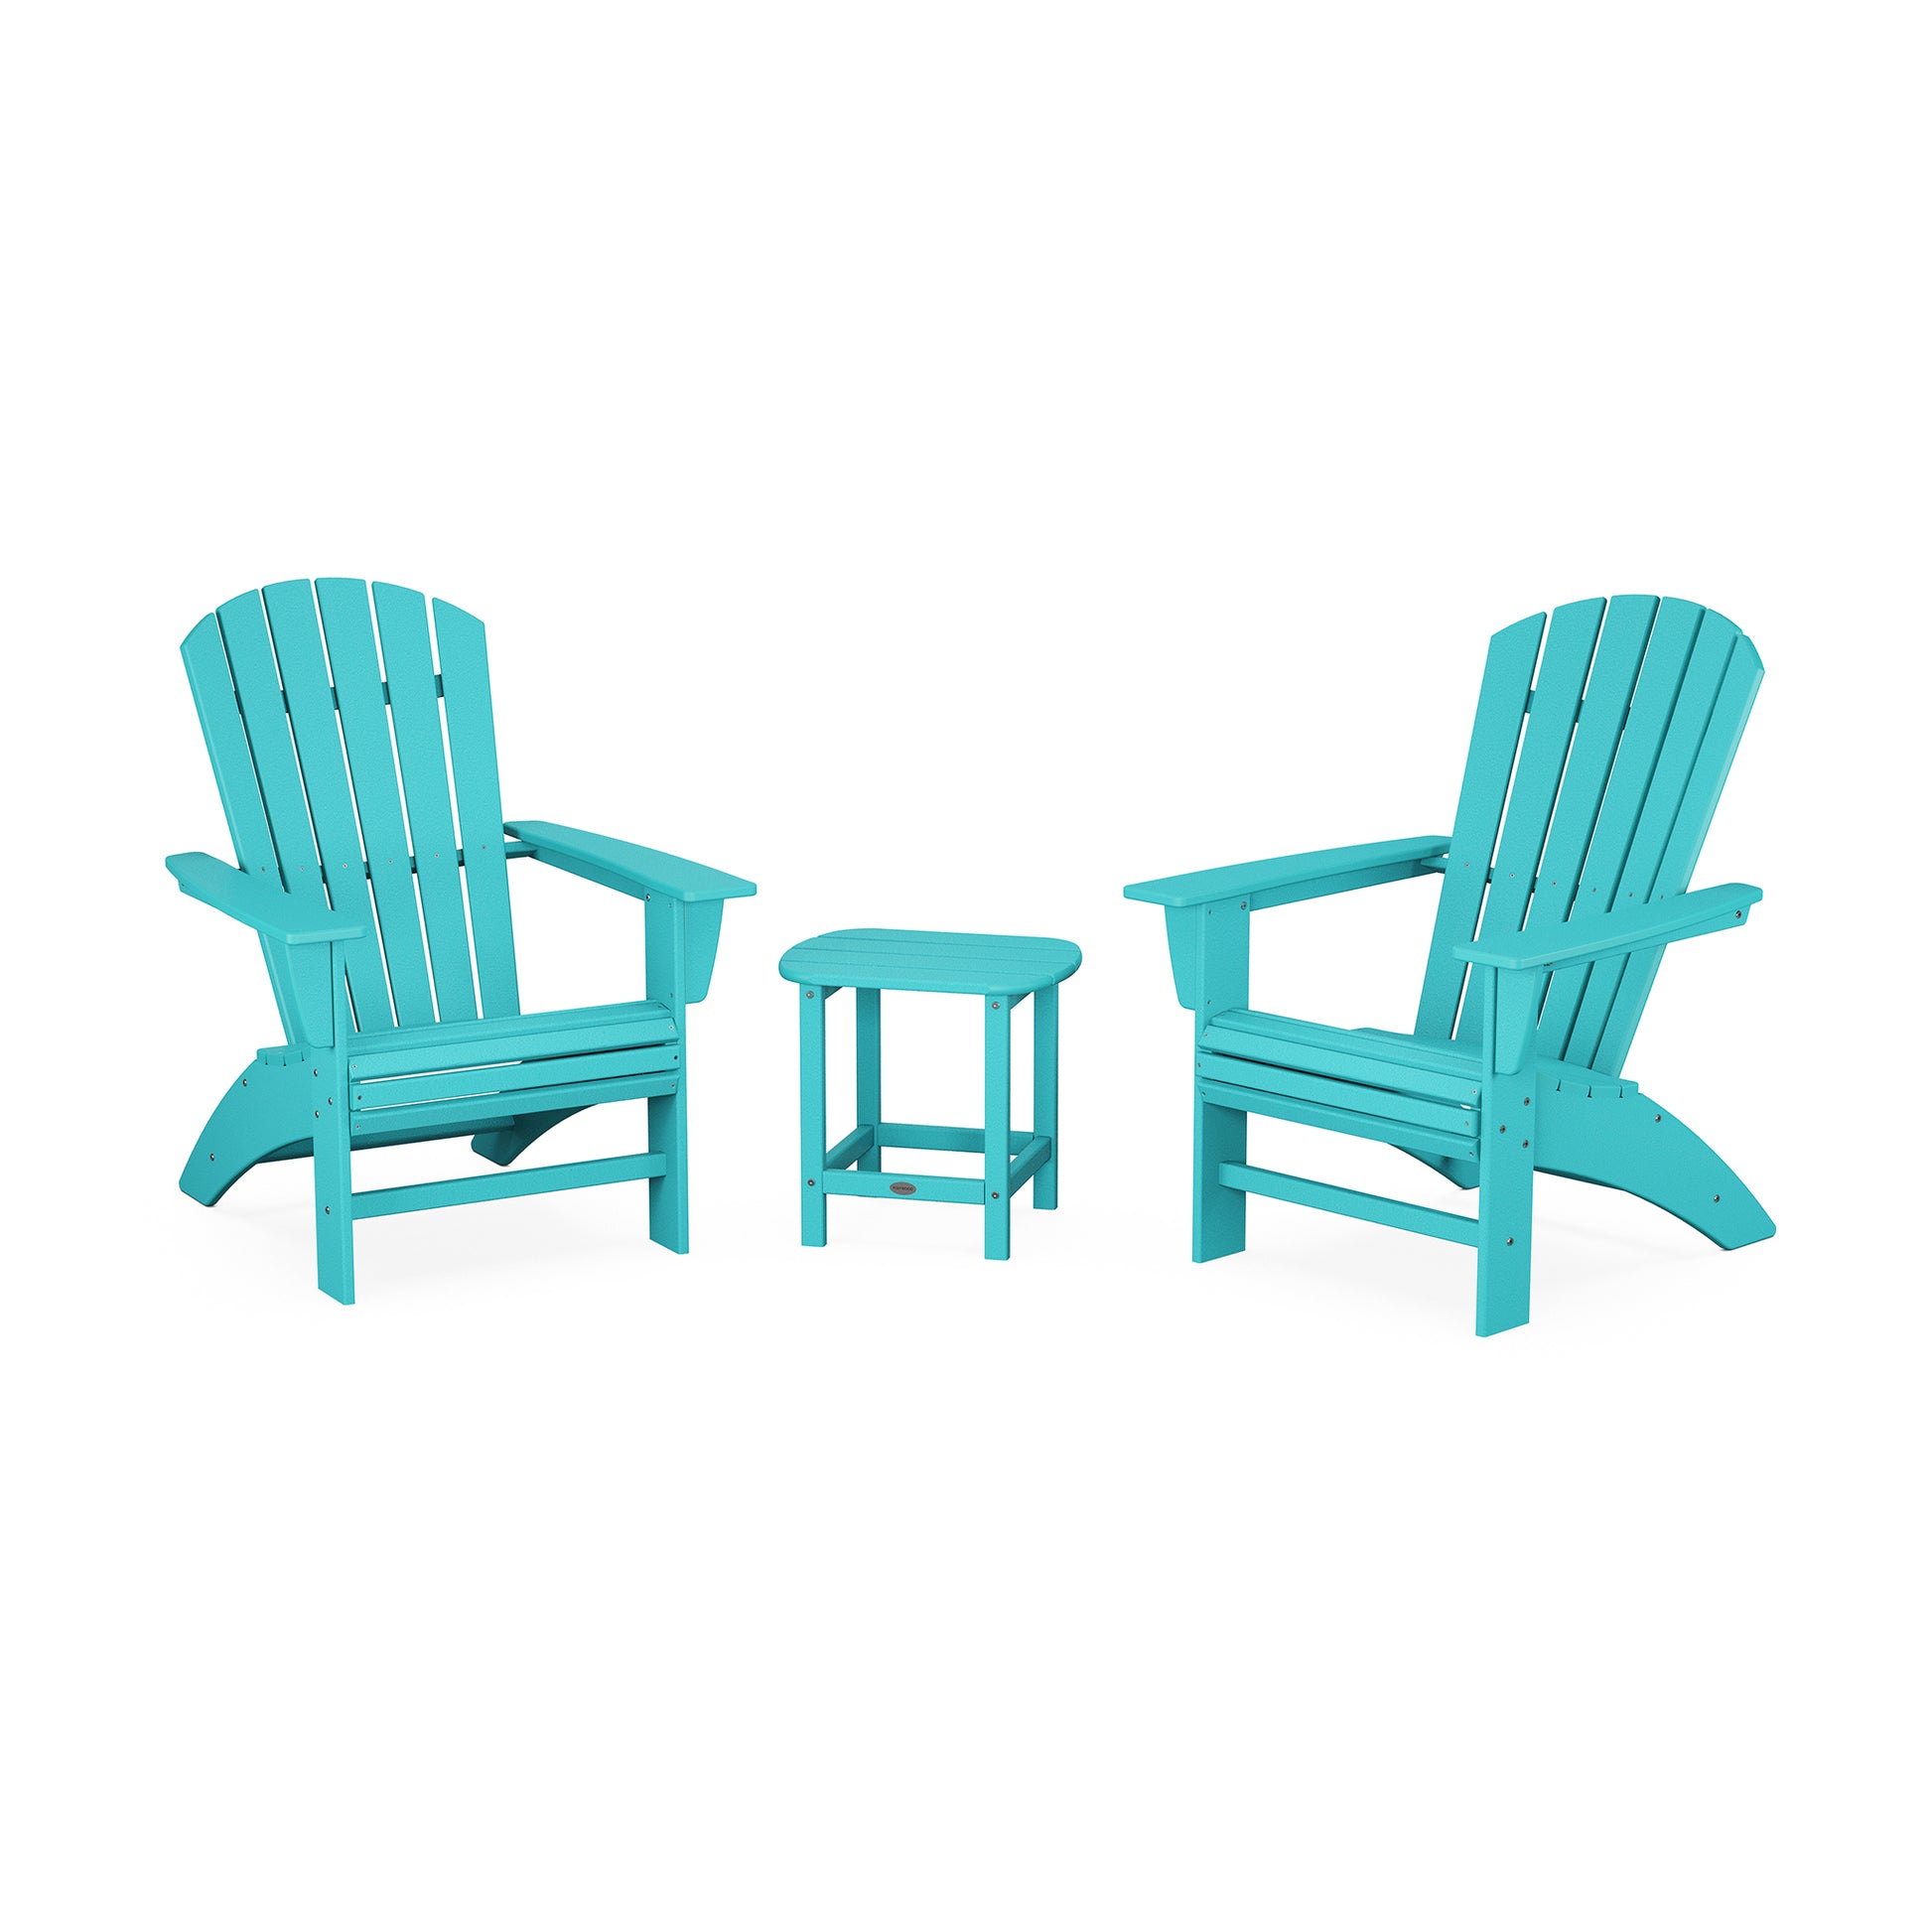 Two bright turquoise POLYWOOD® Nautical 3-Piece Curveback Adirondack Sets facing each other, with a small matching side table in between, all set against a plain white background.